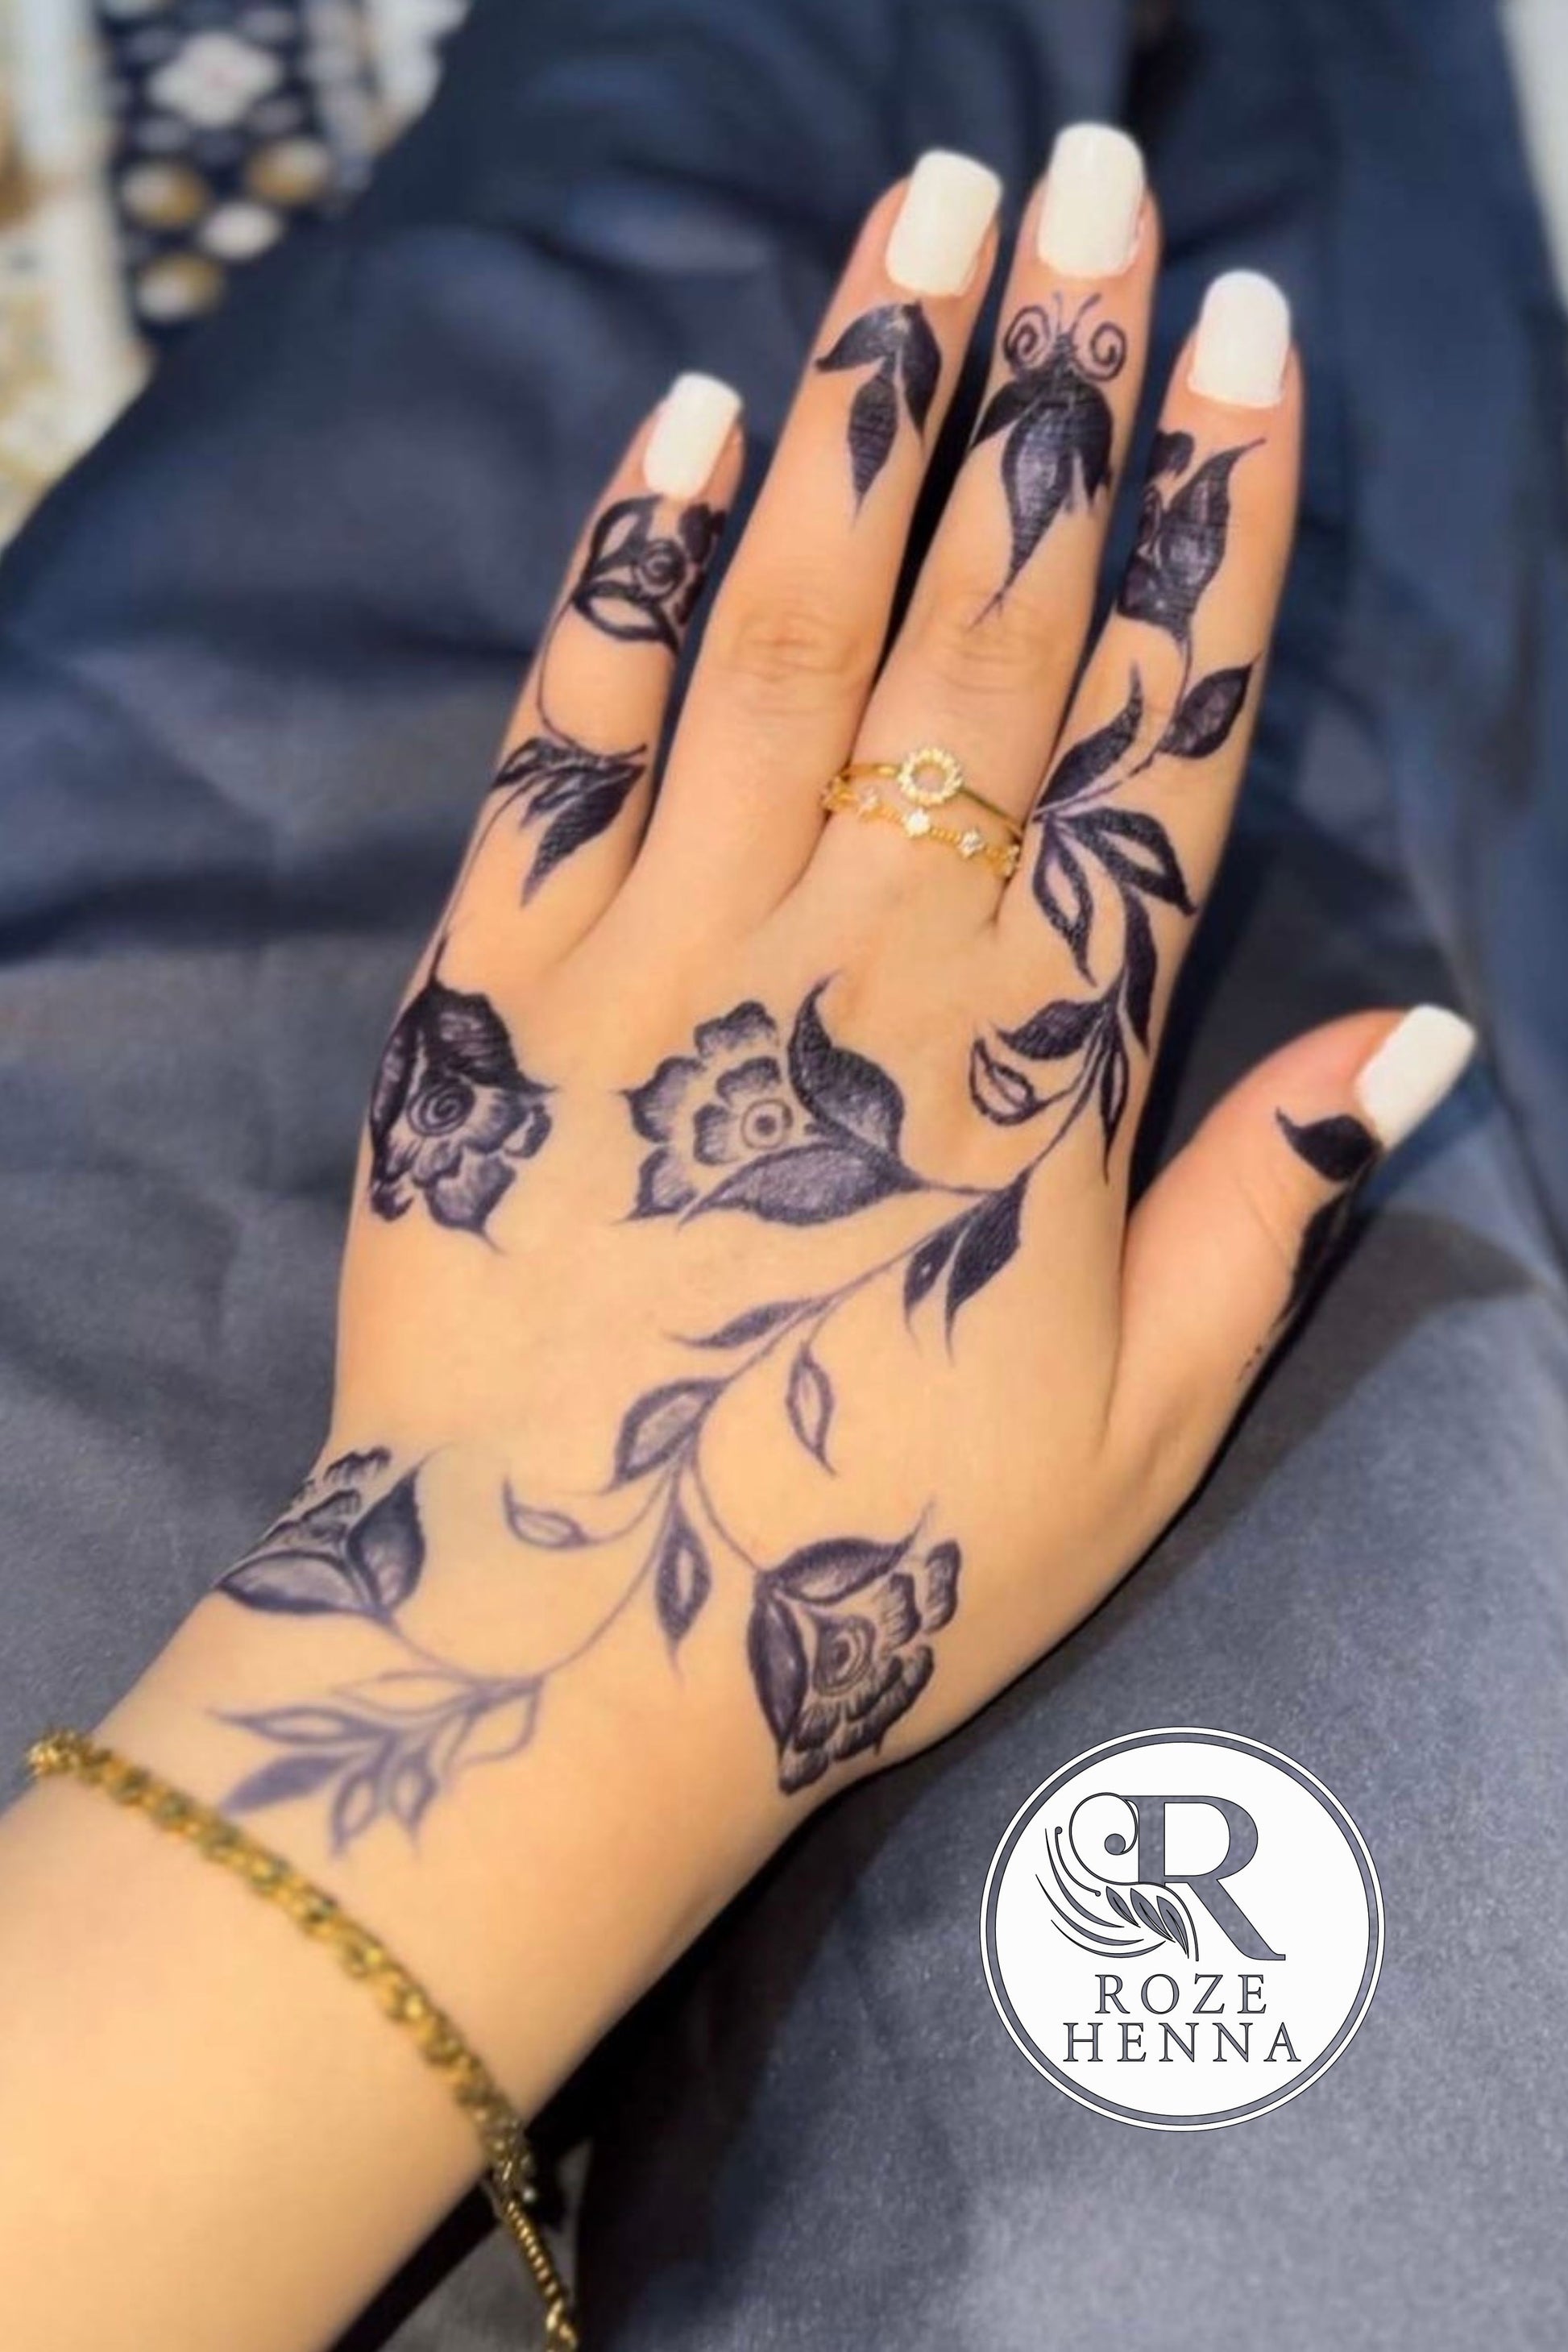 You can expect a similar stain when using jagua gel